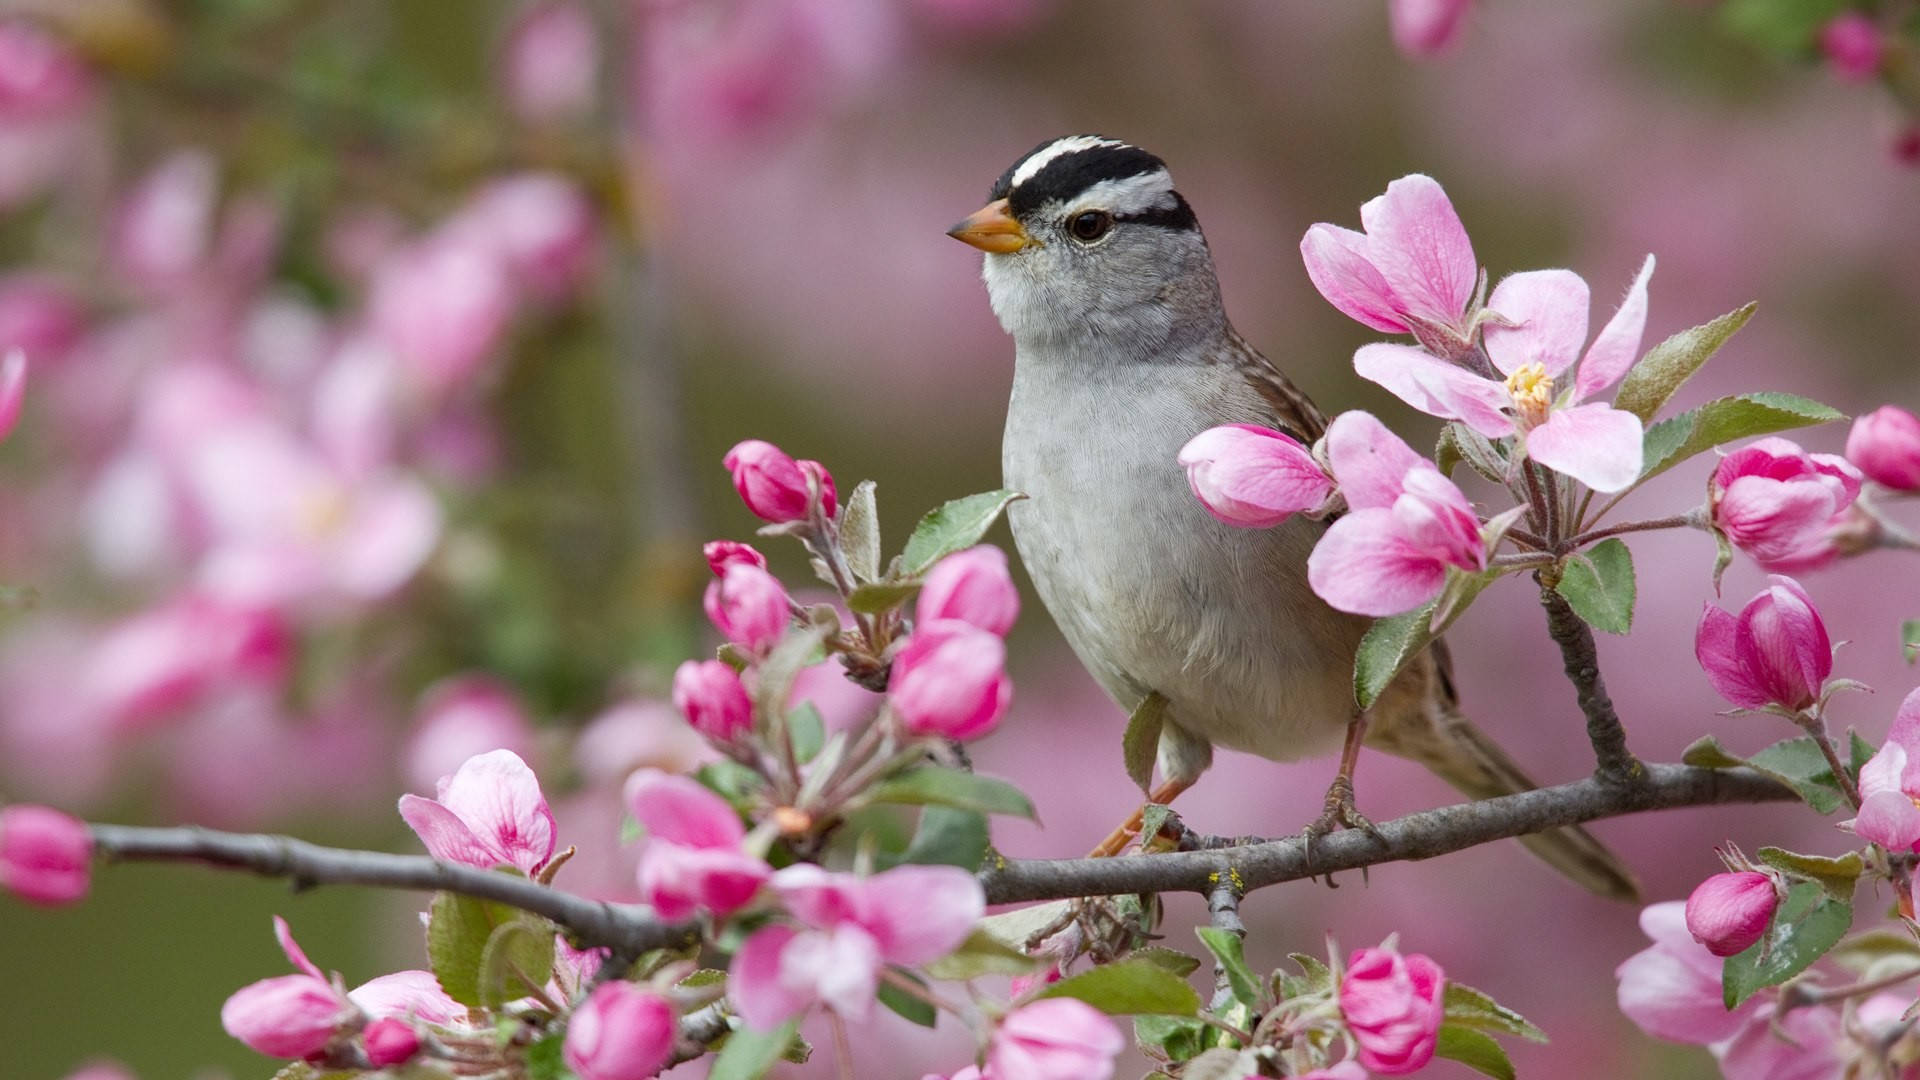 A Bird Is Sitting On A Branch With Pink Flowers Wallpaper